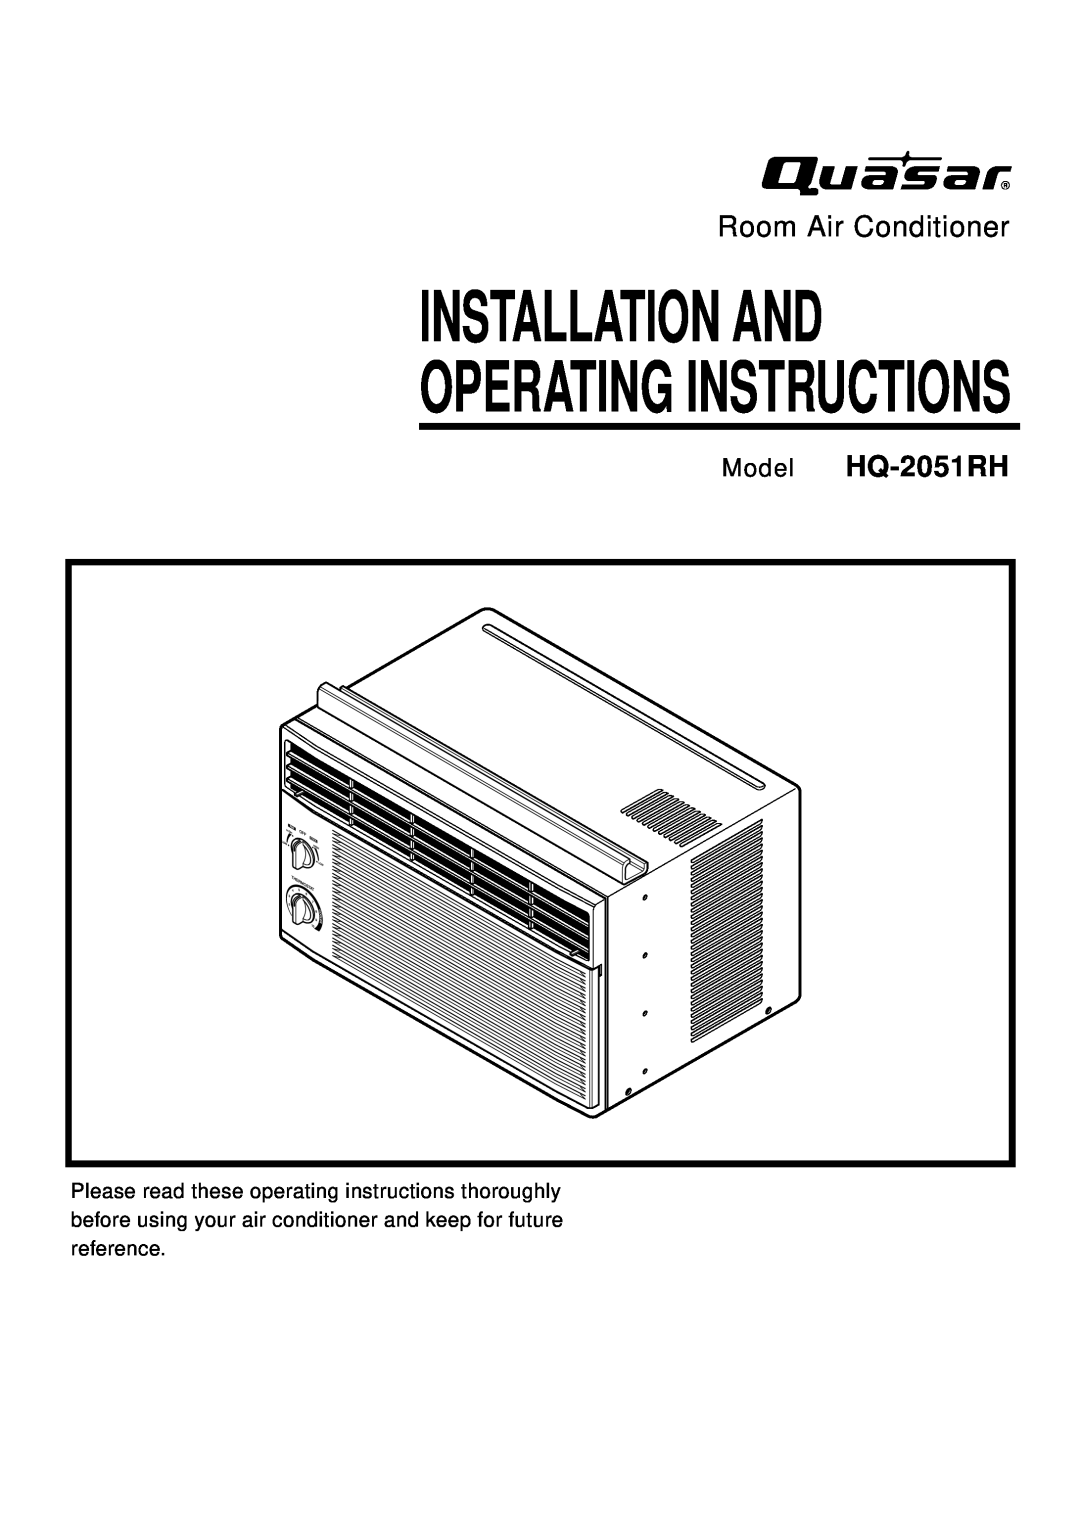 Panasonic manual Model HQ-2051RH, Operating Instructions, Installation And, Room Air Conditioner 